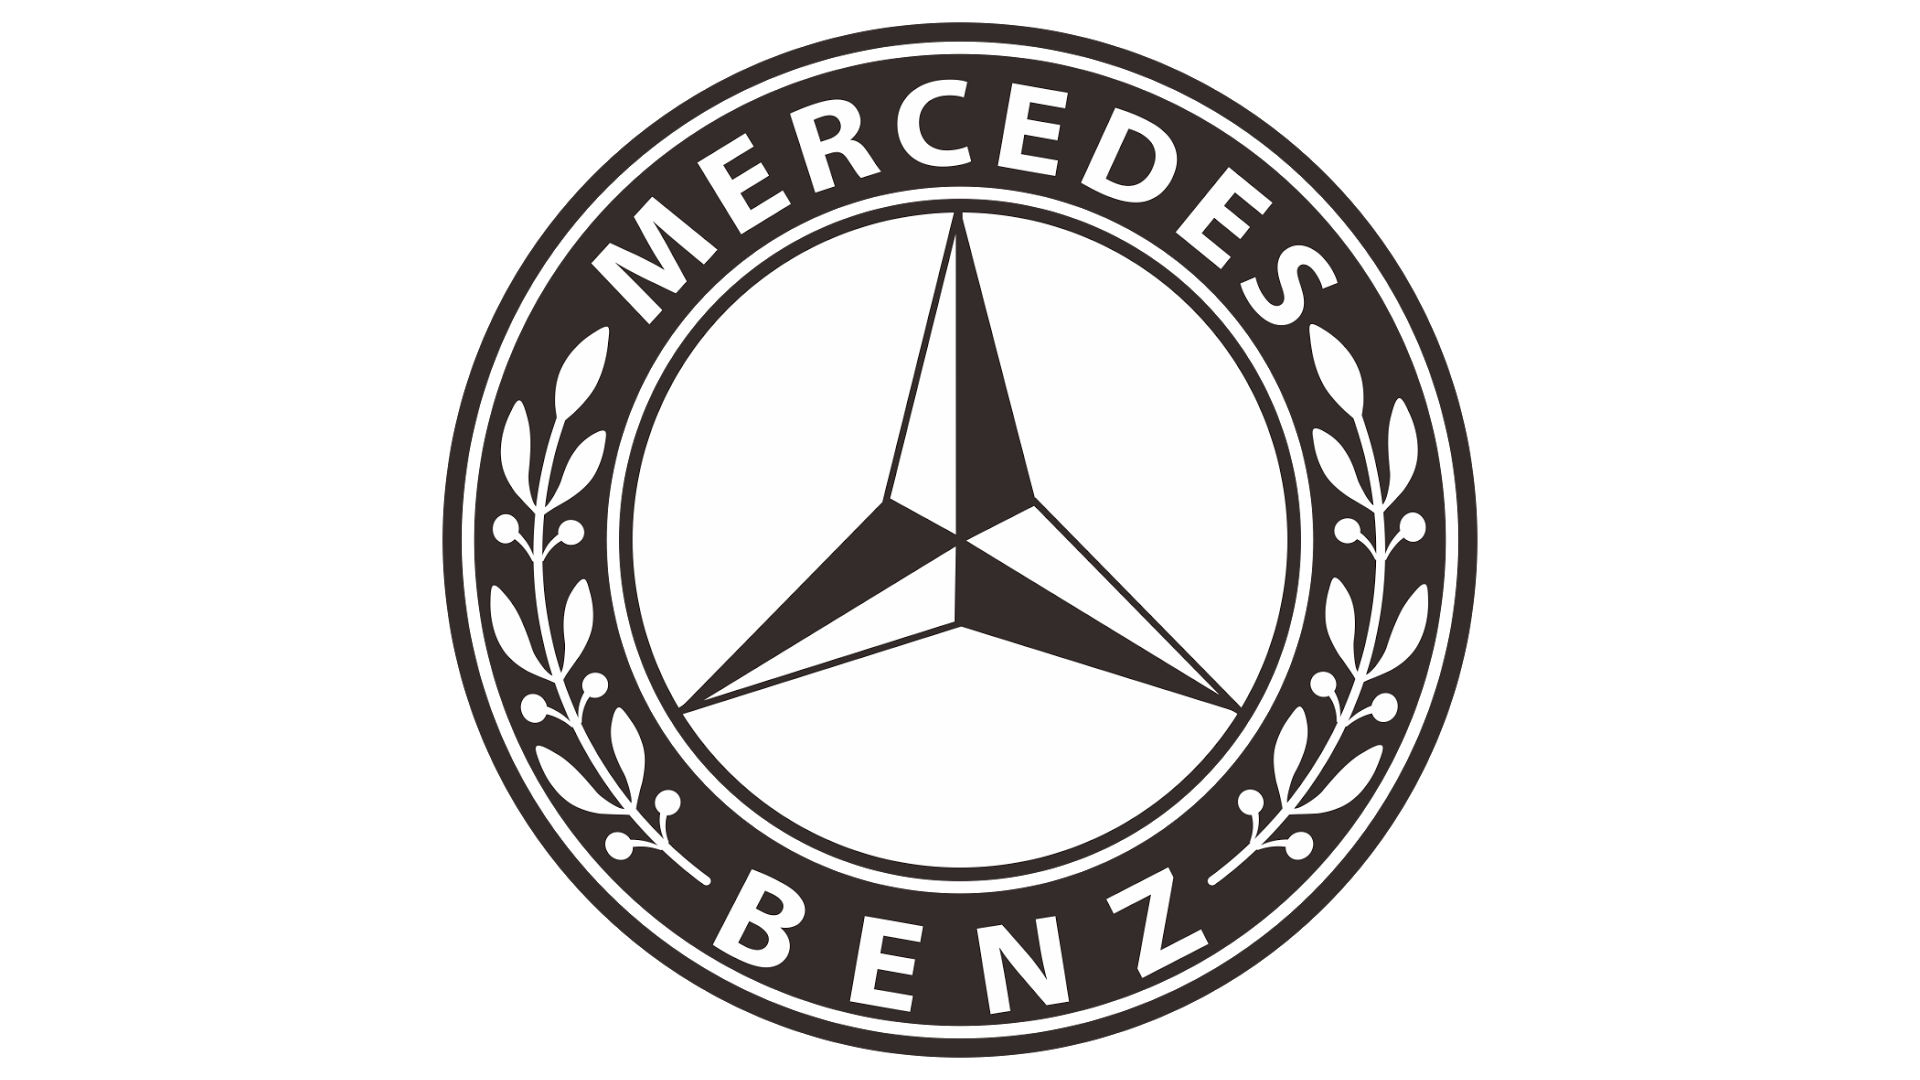 Mercedes-Benz Logo History, 3-Pointed Star Meaning